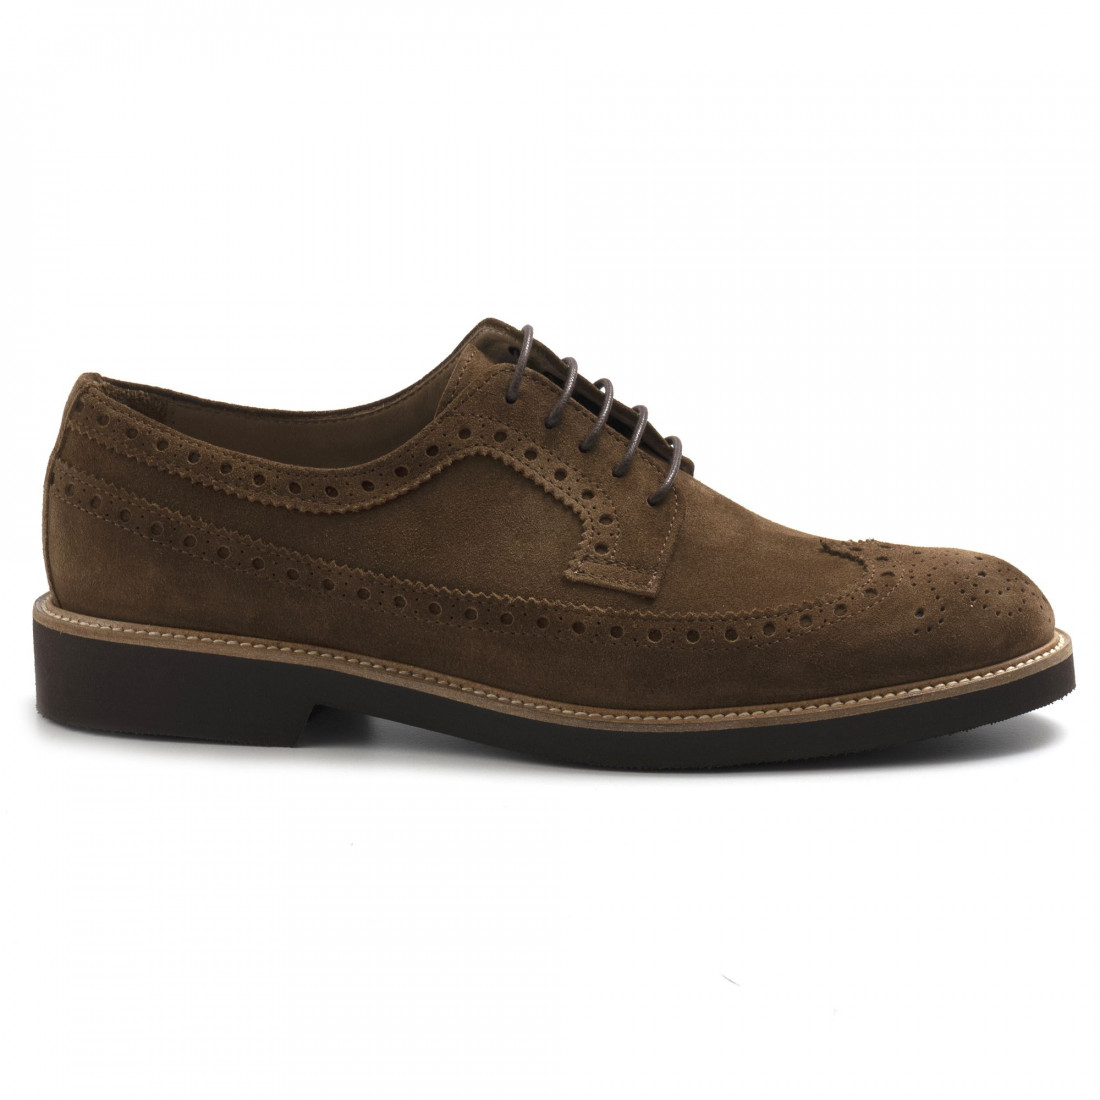 Men's Jerold Wilton full brogue derby shoes in brown suede